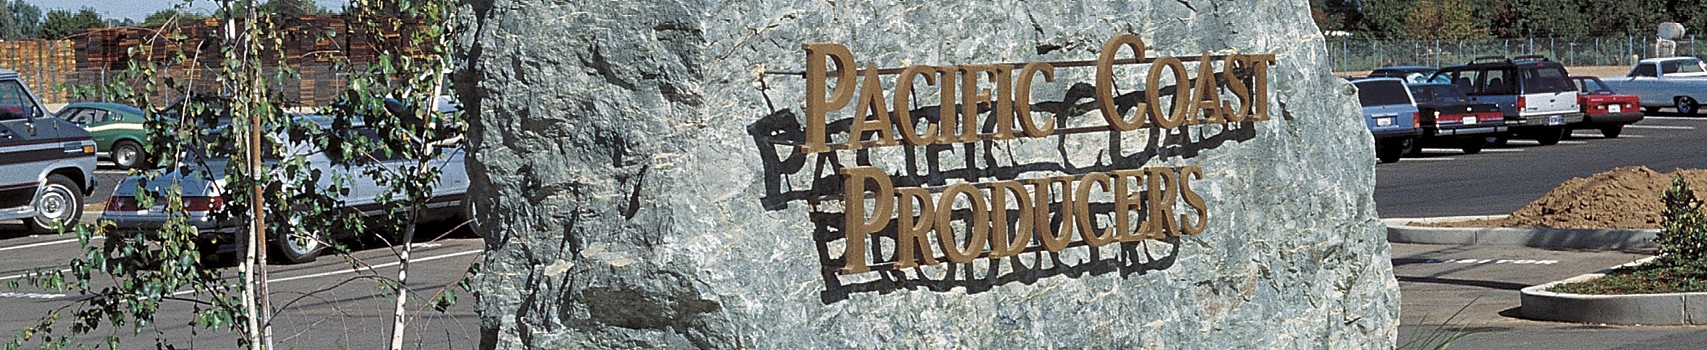 A large stone sign in front of a parking lot near the Pacific Coast Producers corporate office.